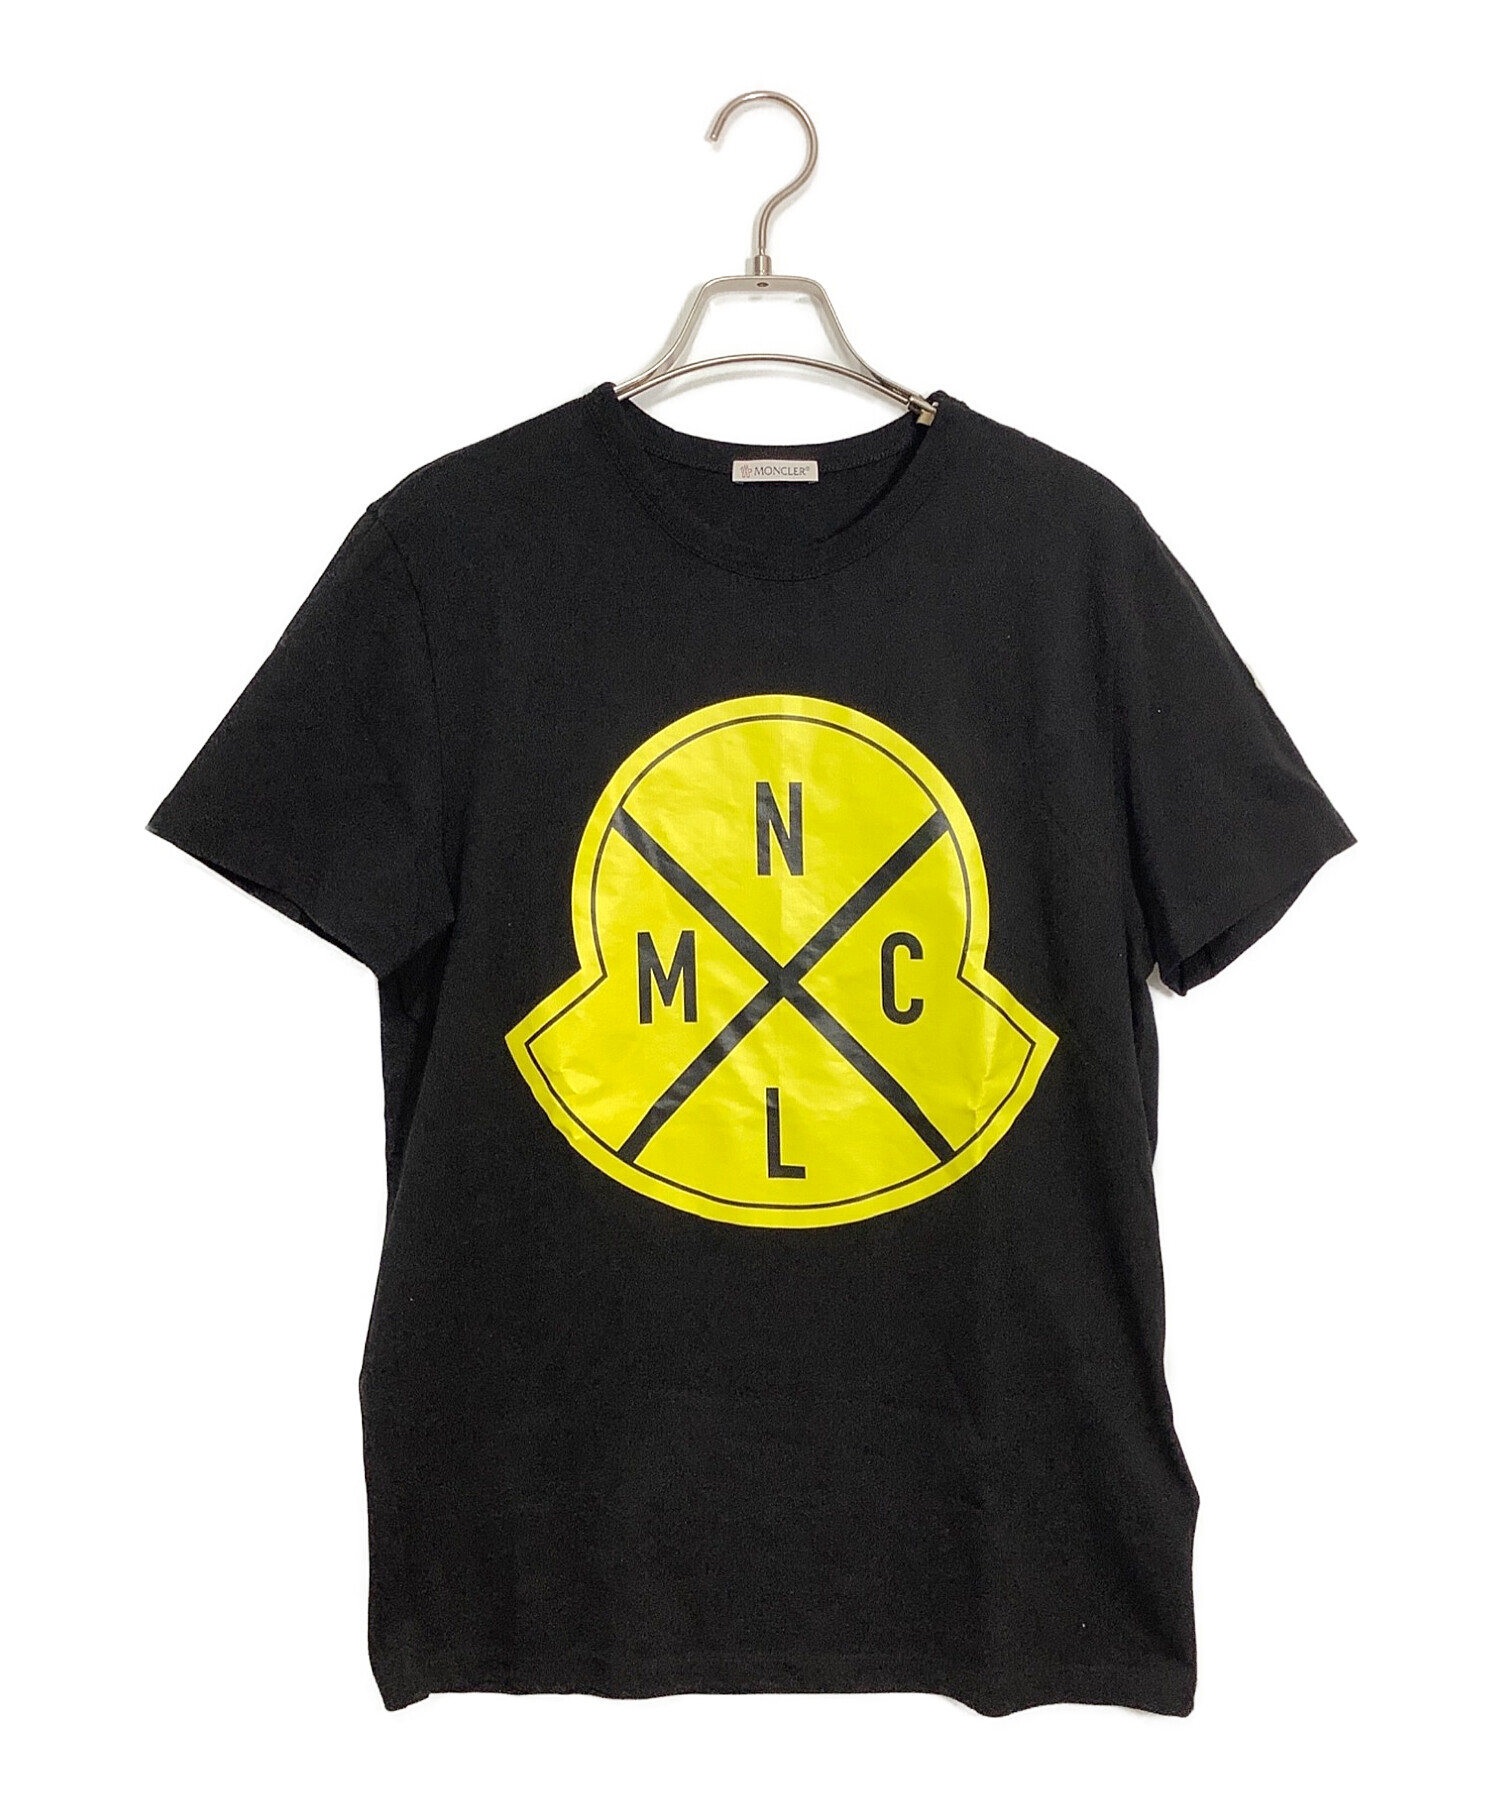 monclerMONCLER MAGLIA T-SHIRT モンクレール　マグリアTシャツ